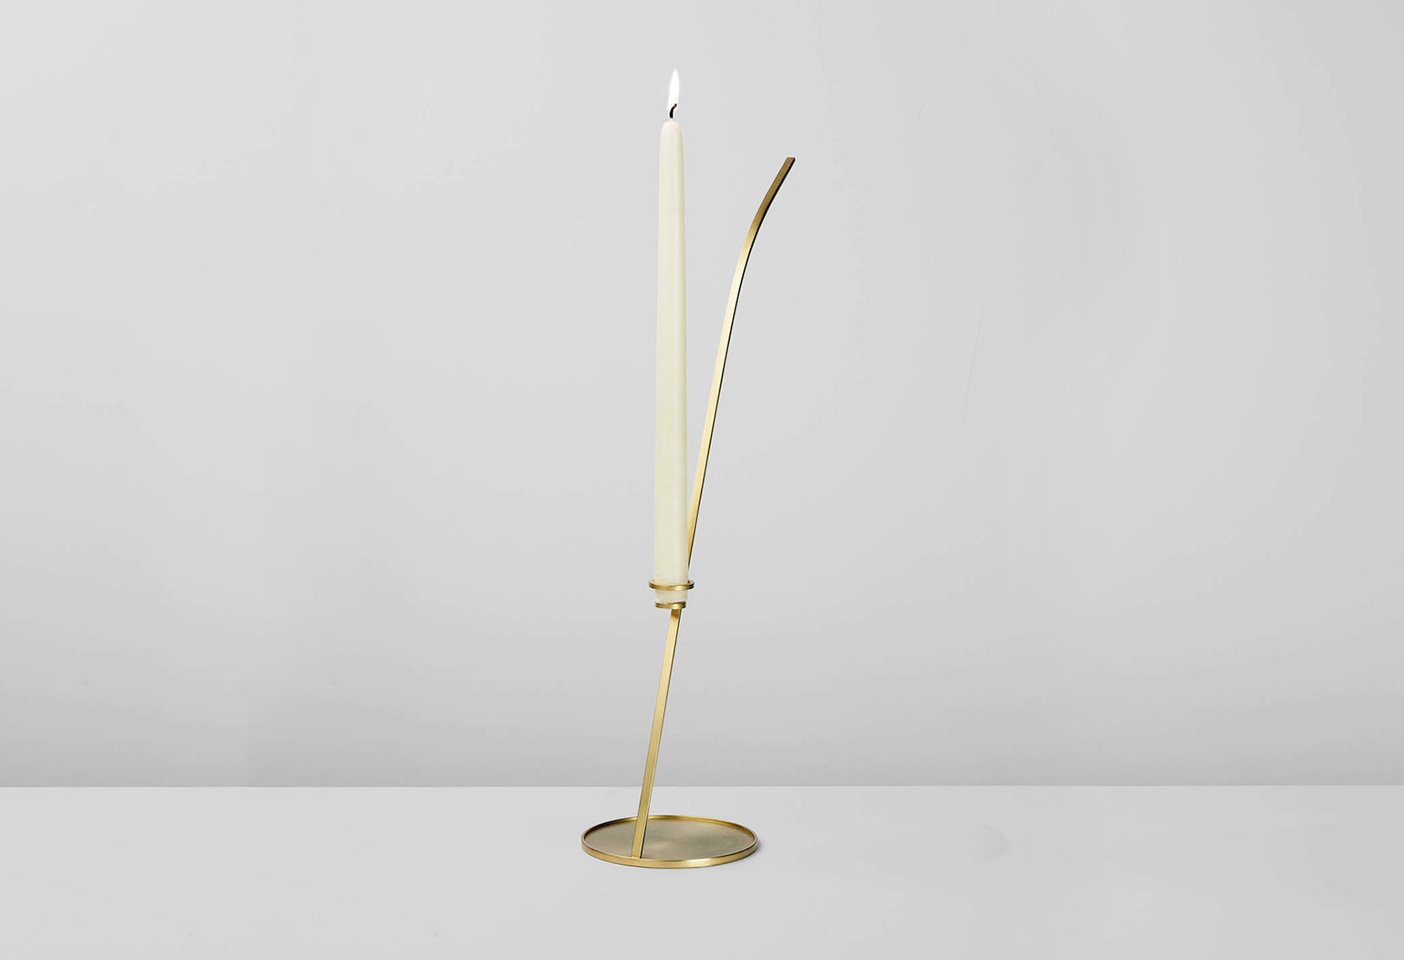 The Gambalunga lamp designed by Formafantasma for Roll & Hill is at once familiar and new, taking the traditions of the candlestick and revisiting them for the 21st century. Photo c/o Roll & Hill.